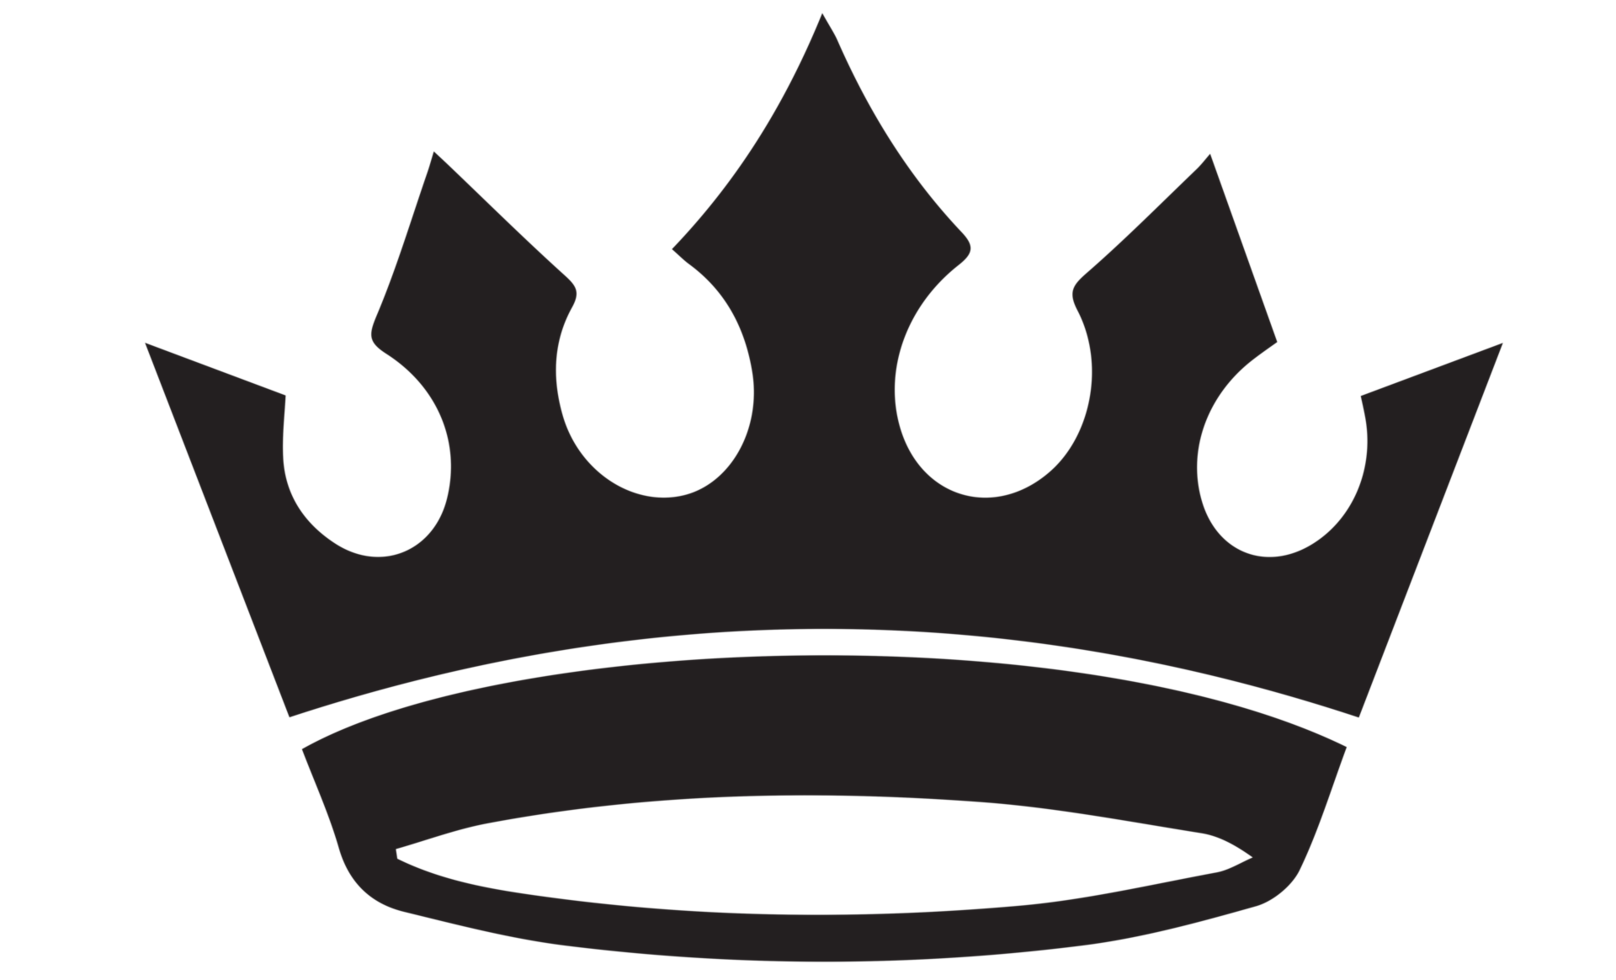 crown icon on transparent background. png